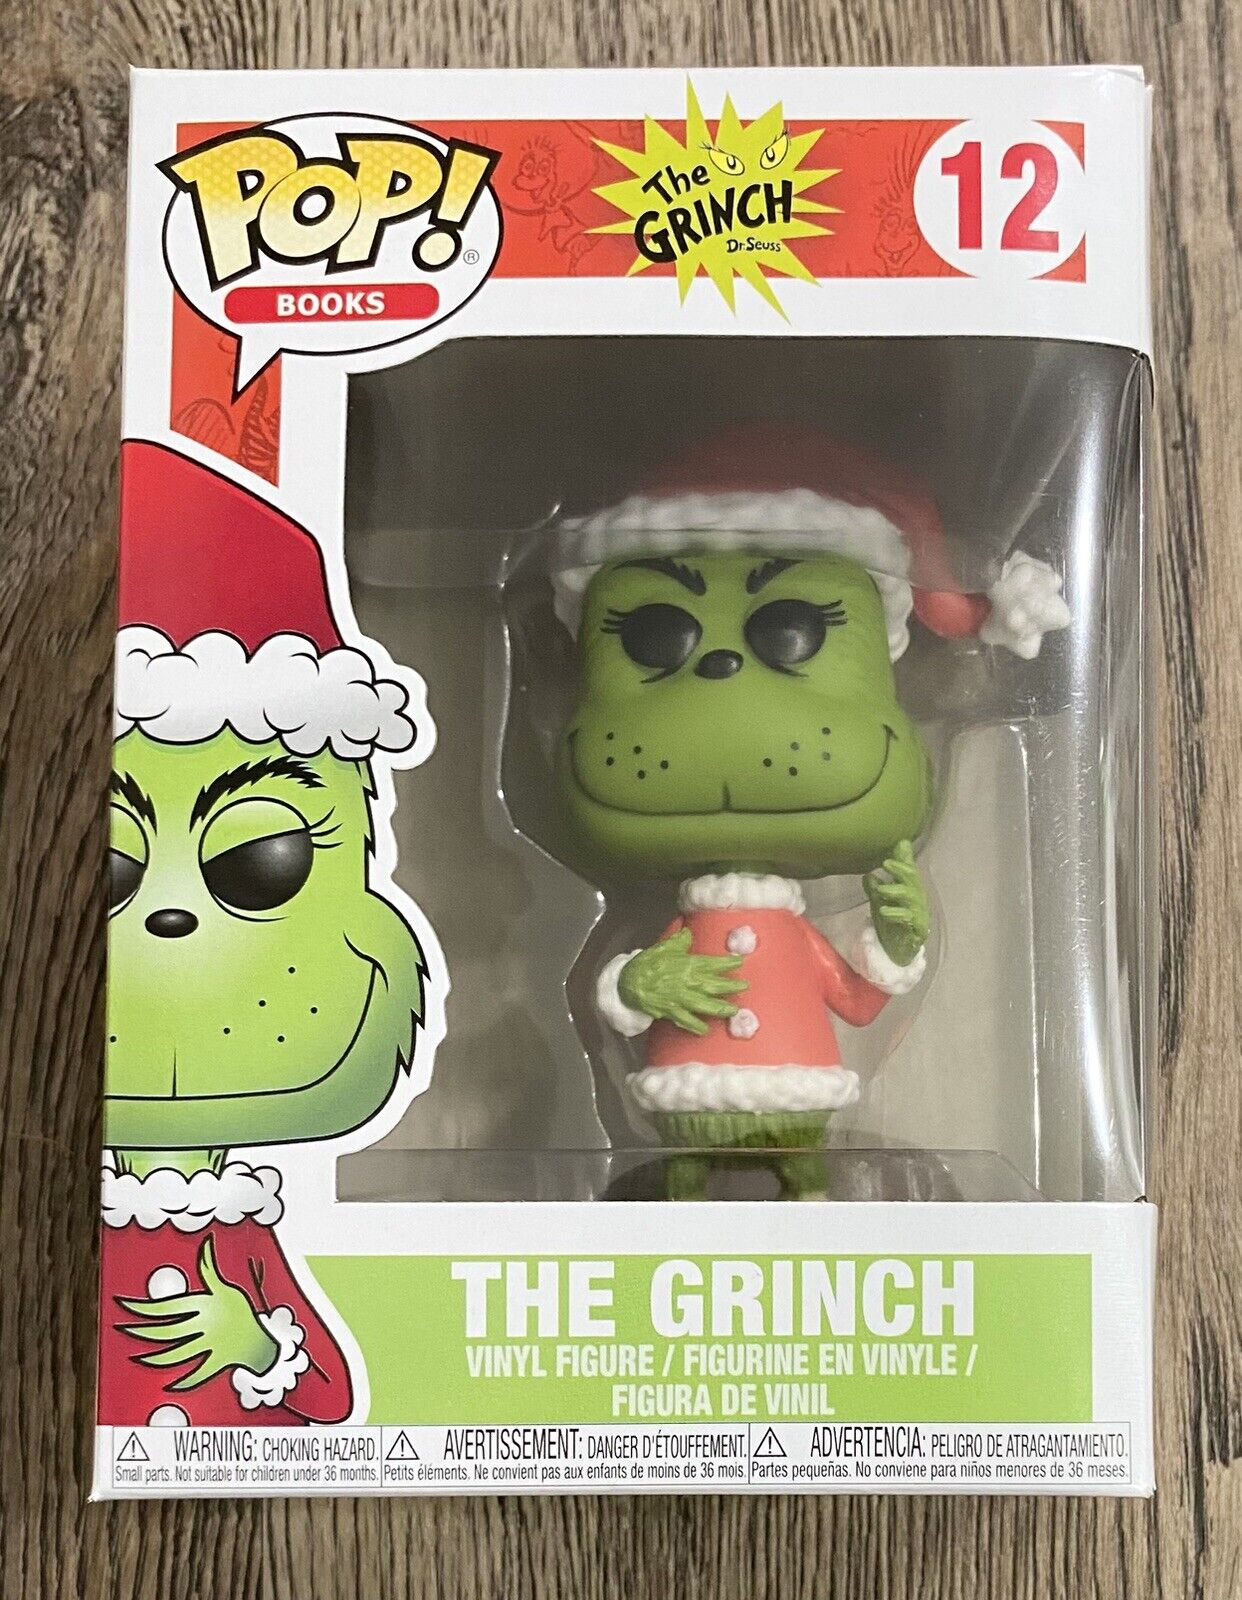 Funko Pop Books - How The Grinch Stole Christmas: The Grinch #12 Vaulted